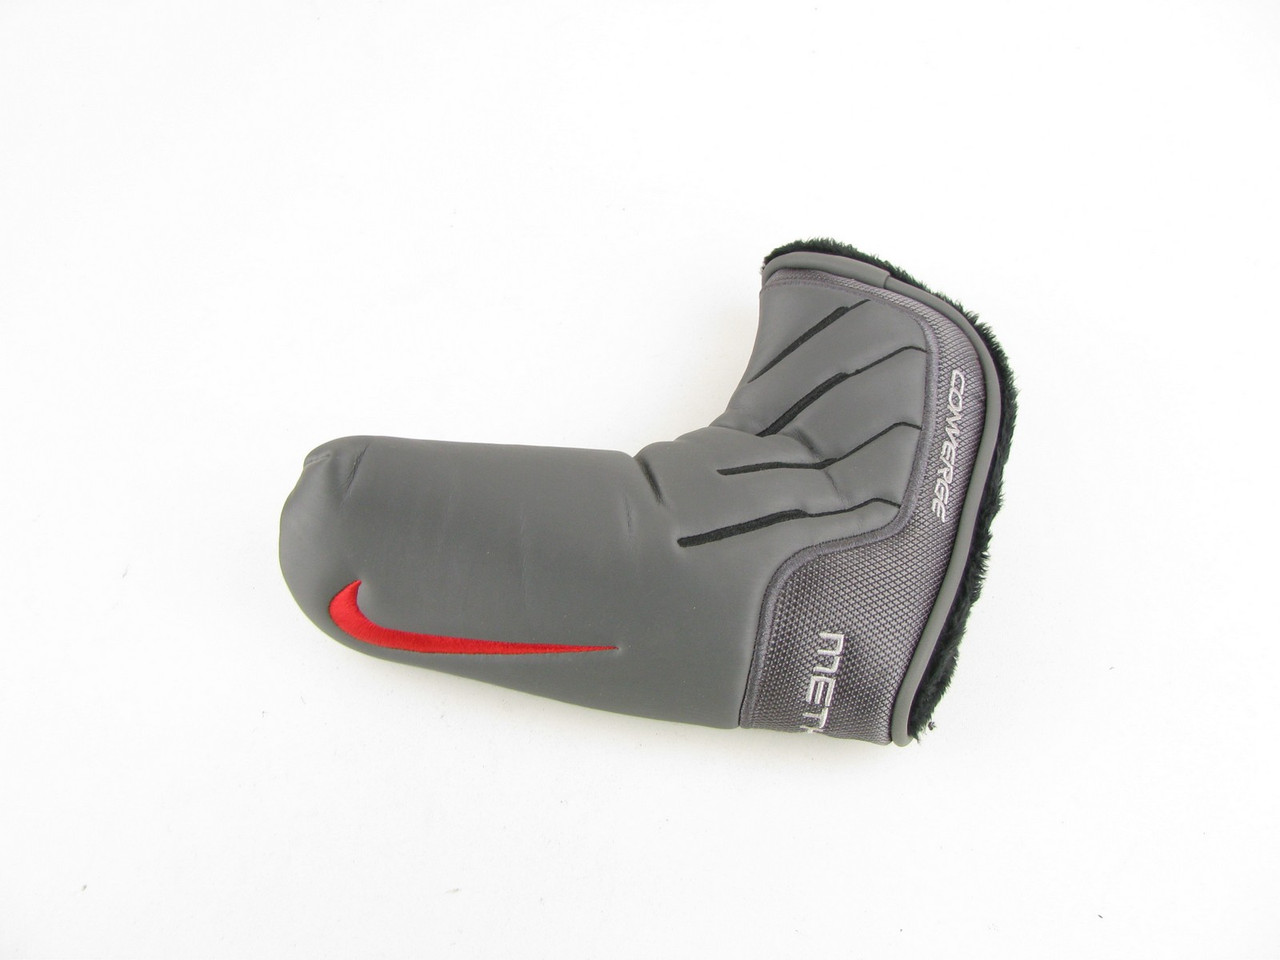 NEW Nike Method Converge Blade Putter Headcover - Clubs n Covers